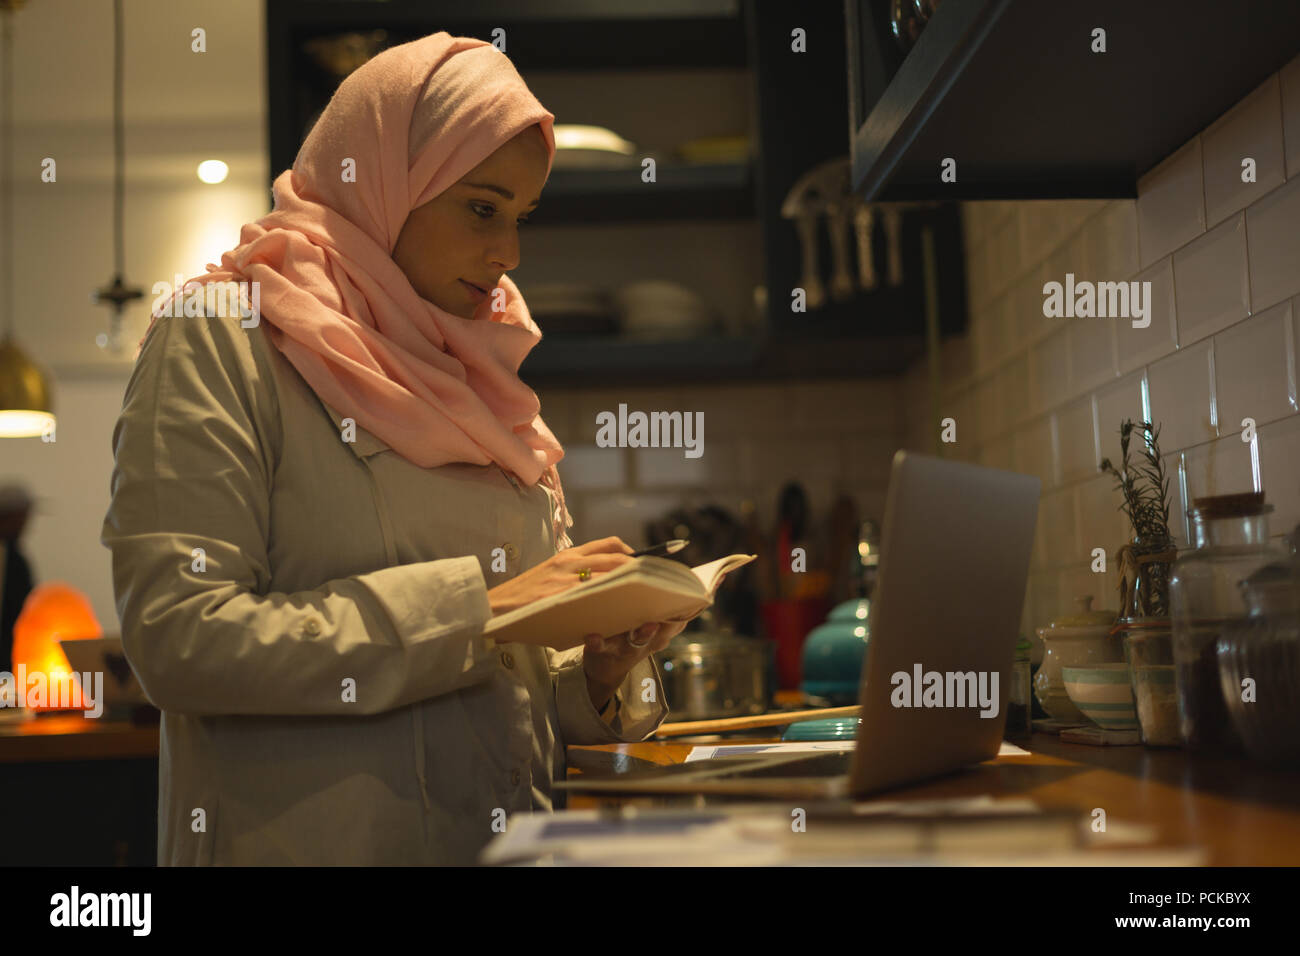 Muslim woman writing down the recipe from laptop Stock Photo